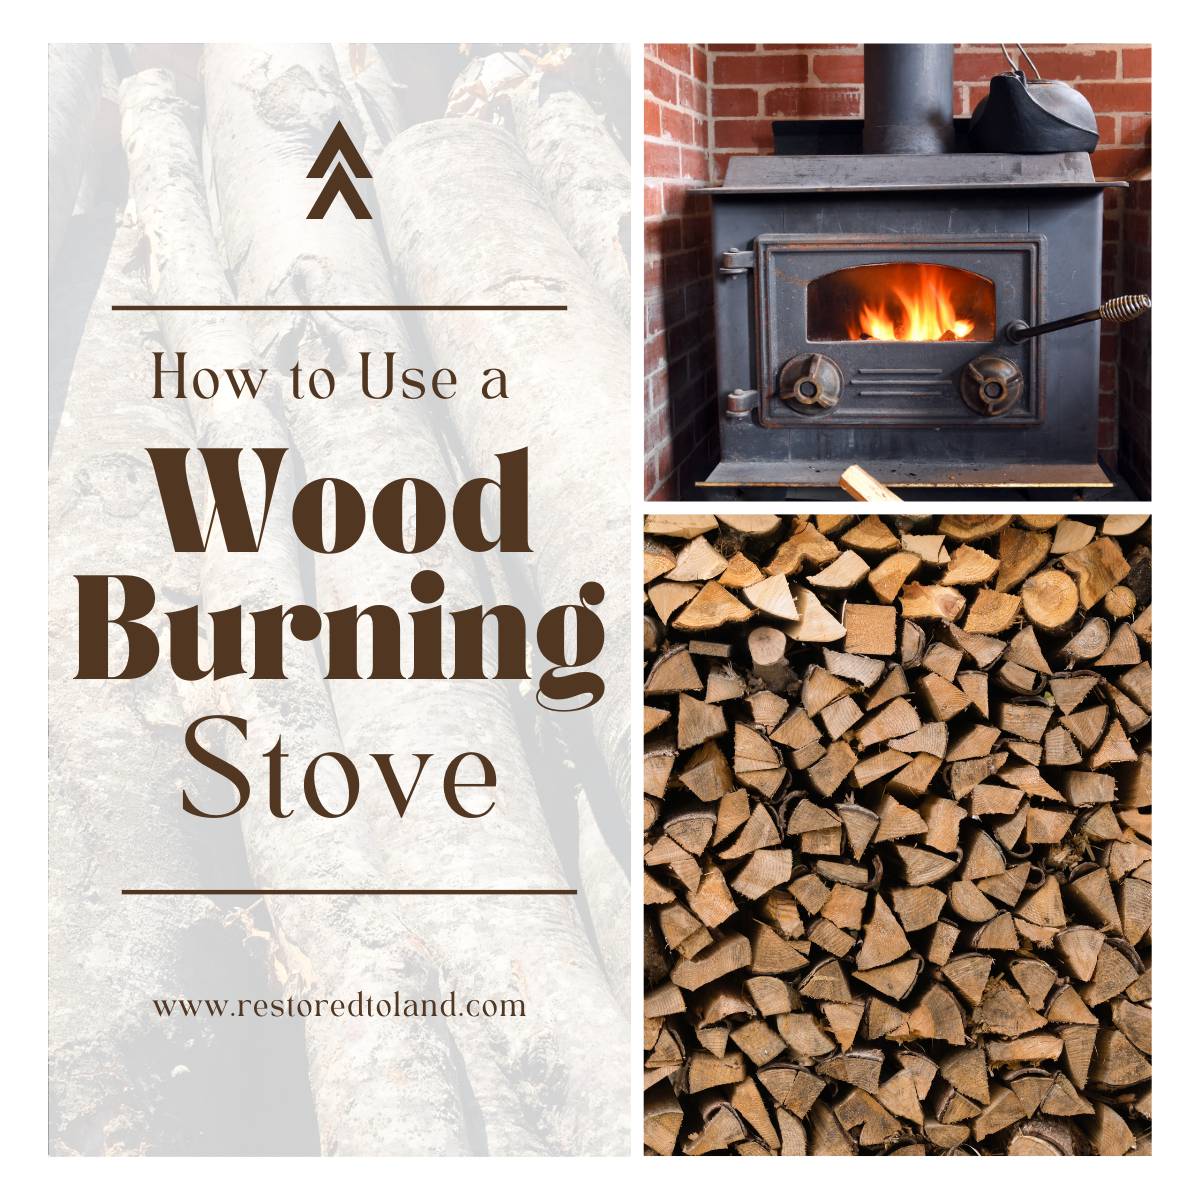 "How to Use a Wood burning Stove" with image of wood pile and wood stove